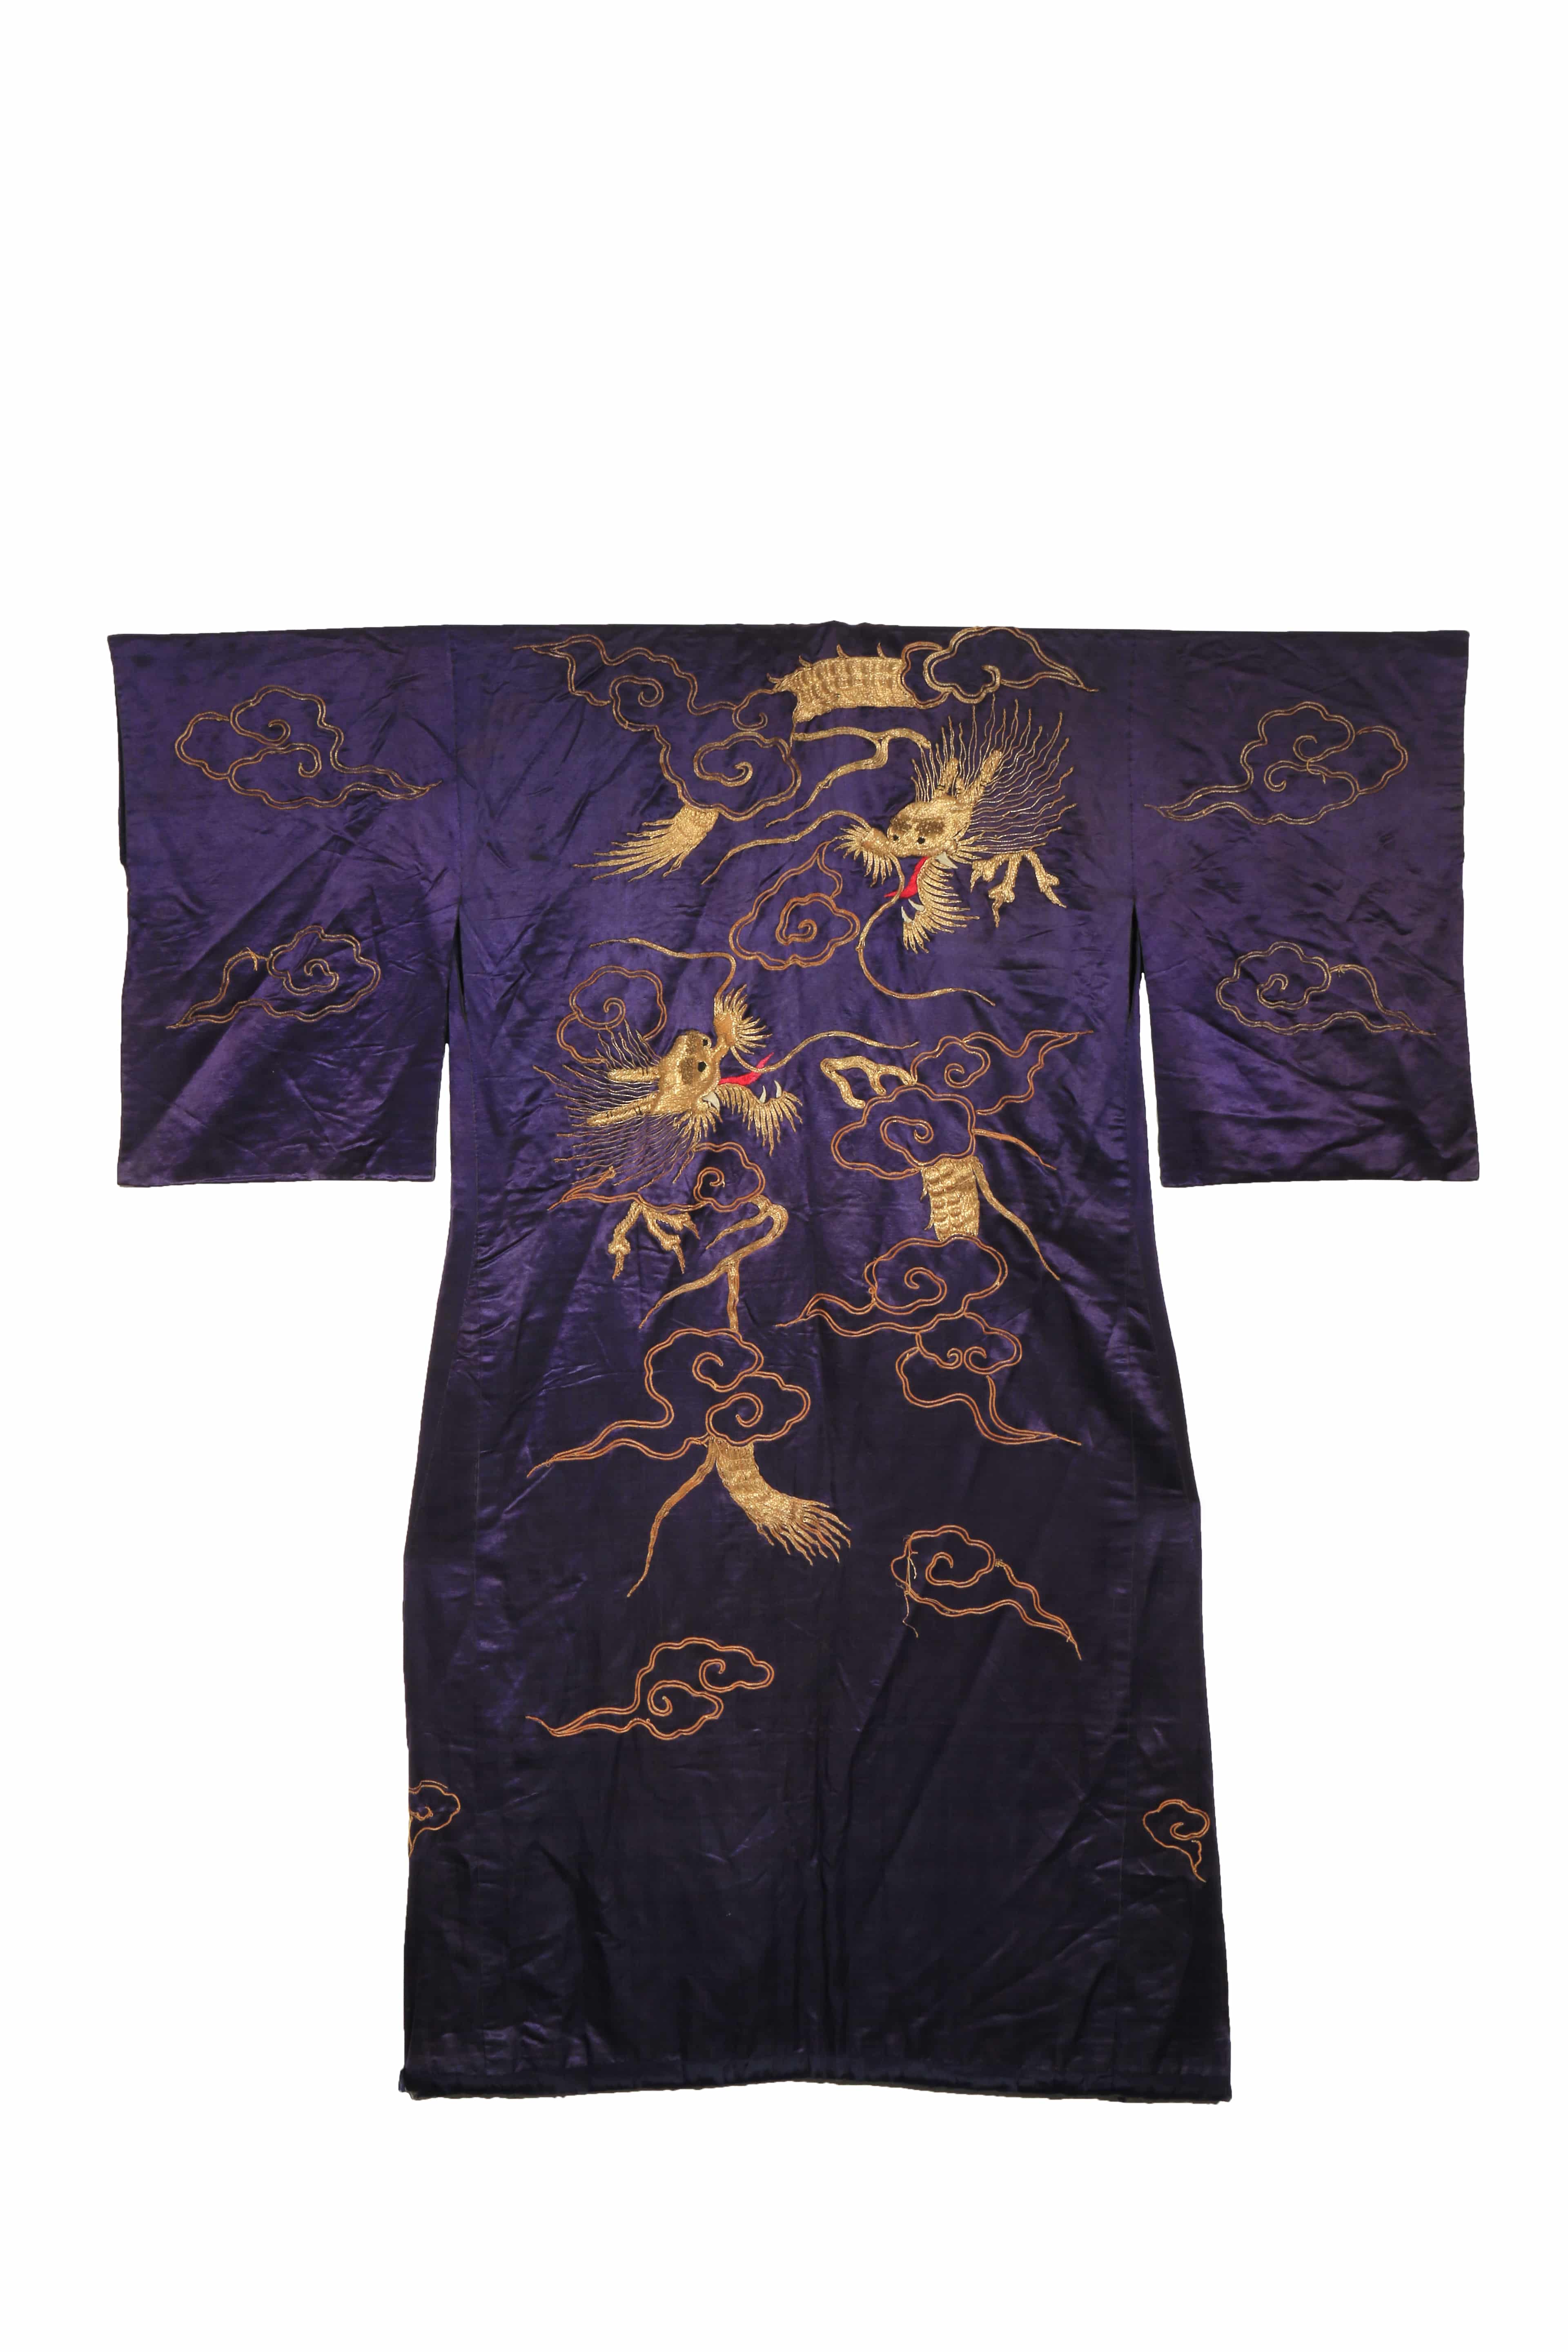 Original Turandot robes are sold on the cheap